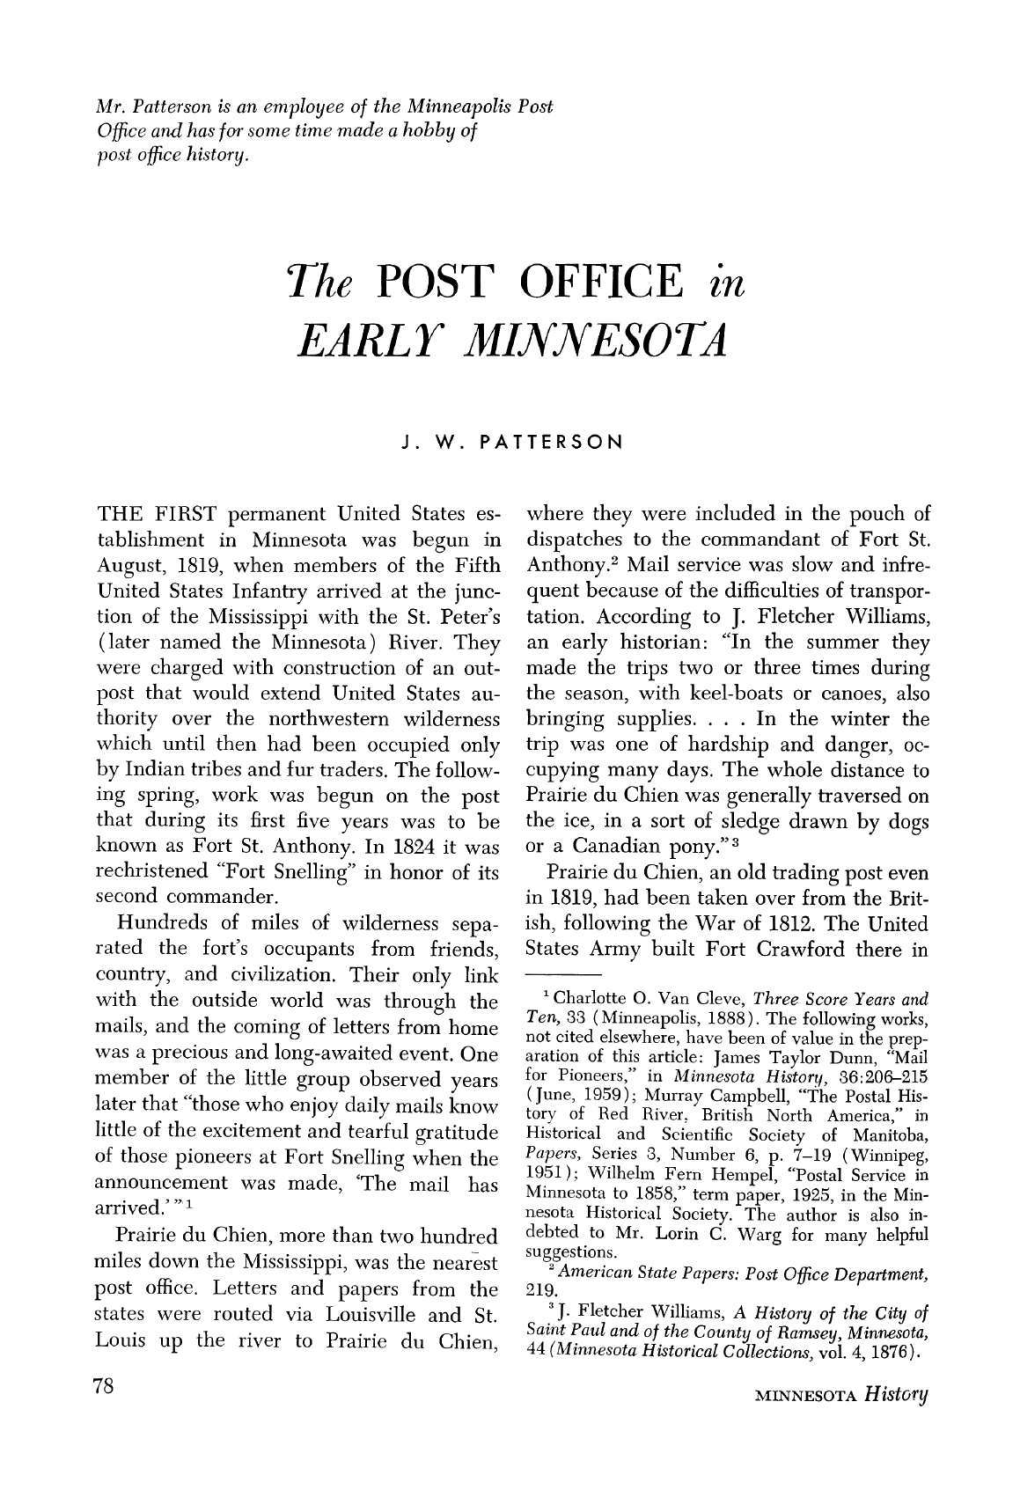 The Post Office in Early Minnesota